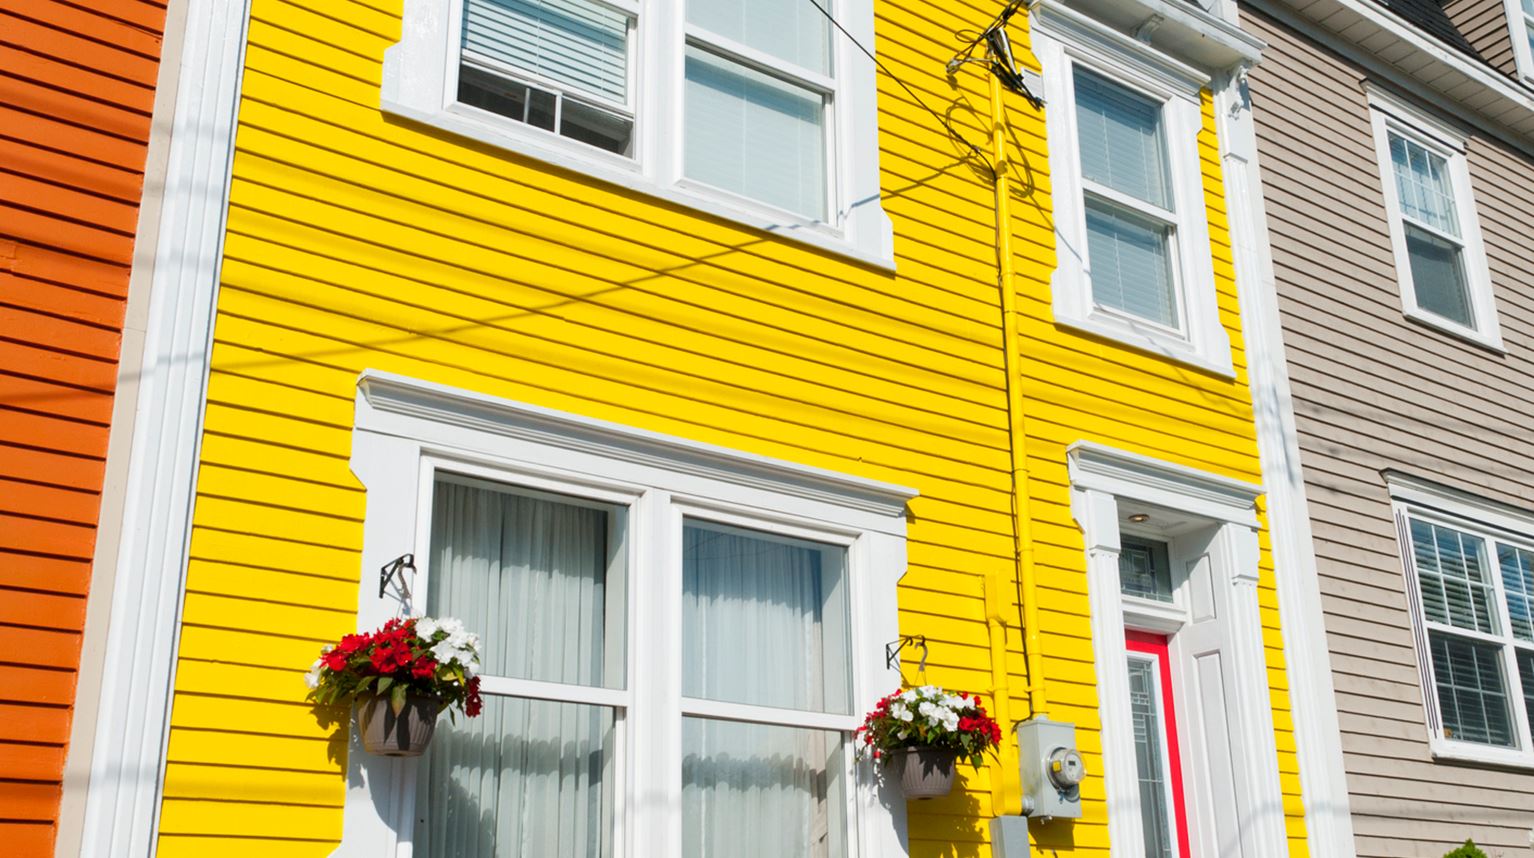 Bright yellow house with red outside wooden chairs in front of the window with flowers, St John's Colourful Clapboard, Newfoundland, Canada